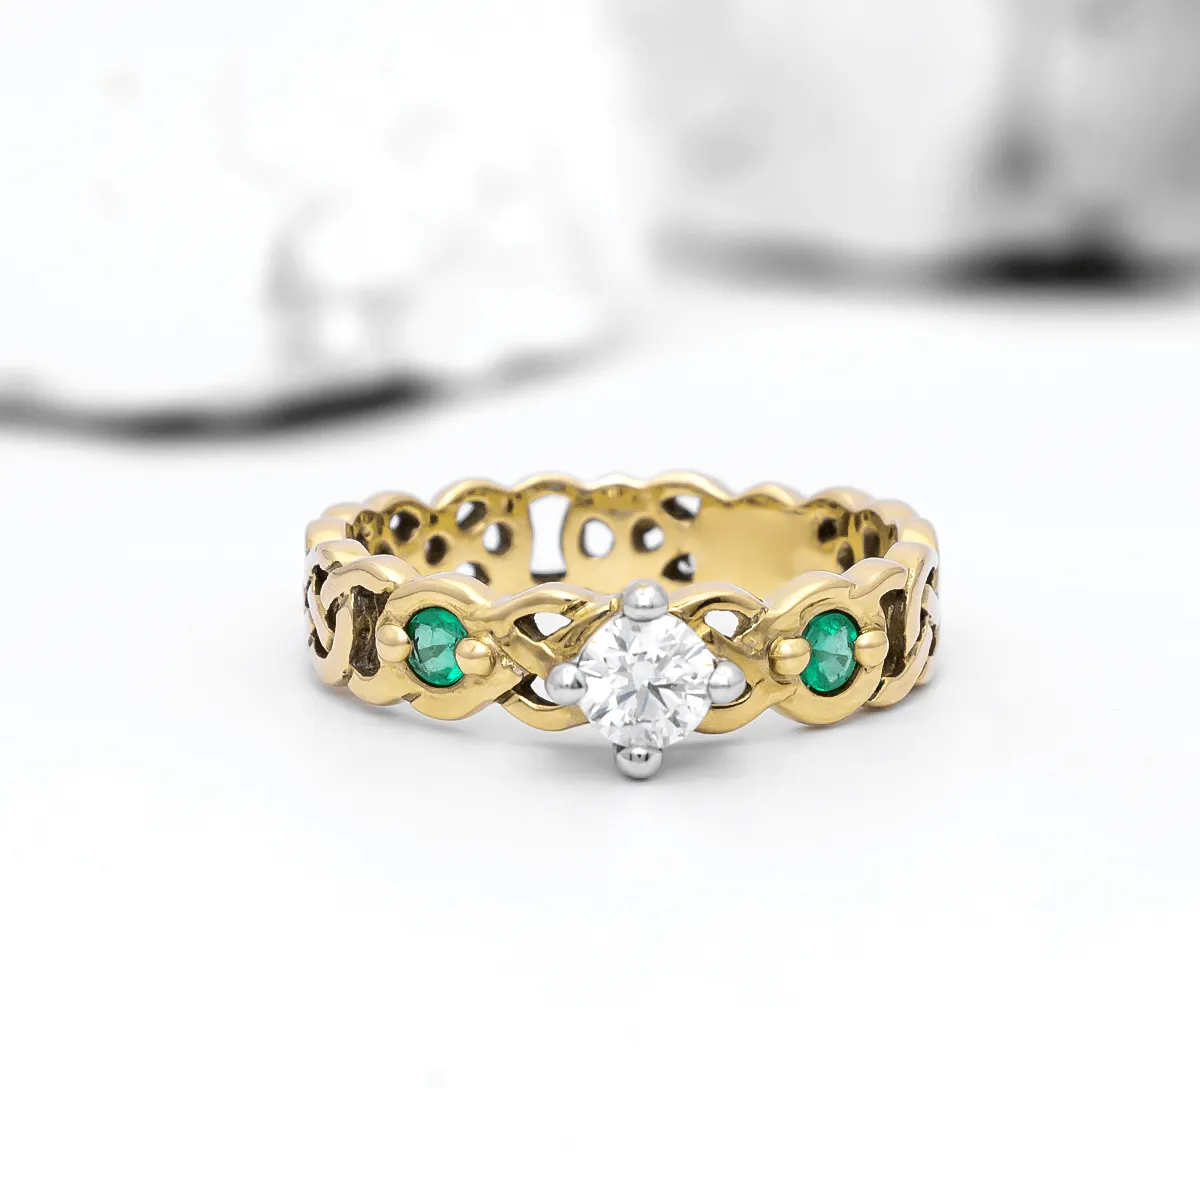 Ijc 1 Yellow Gold Celtic Knot Emerald Ring 7...